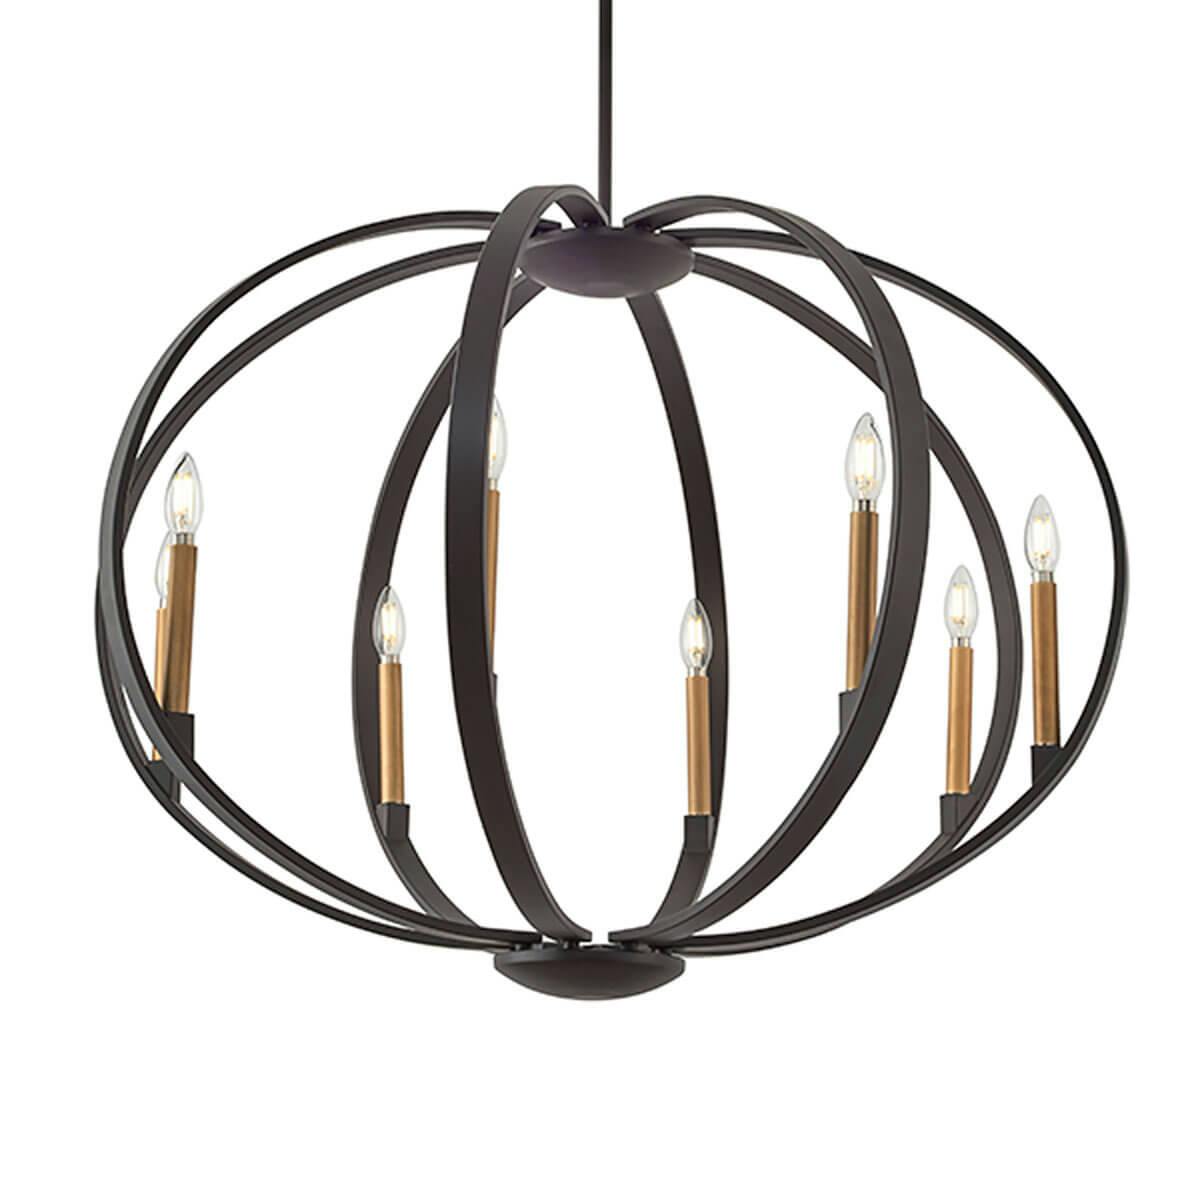 Elata 26.5" Chandelier Bronze with Brass without the canopy on a white background